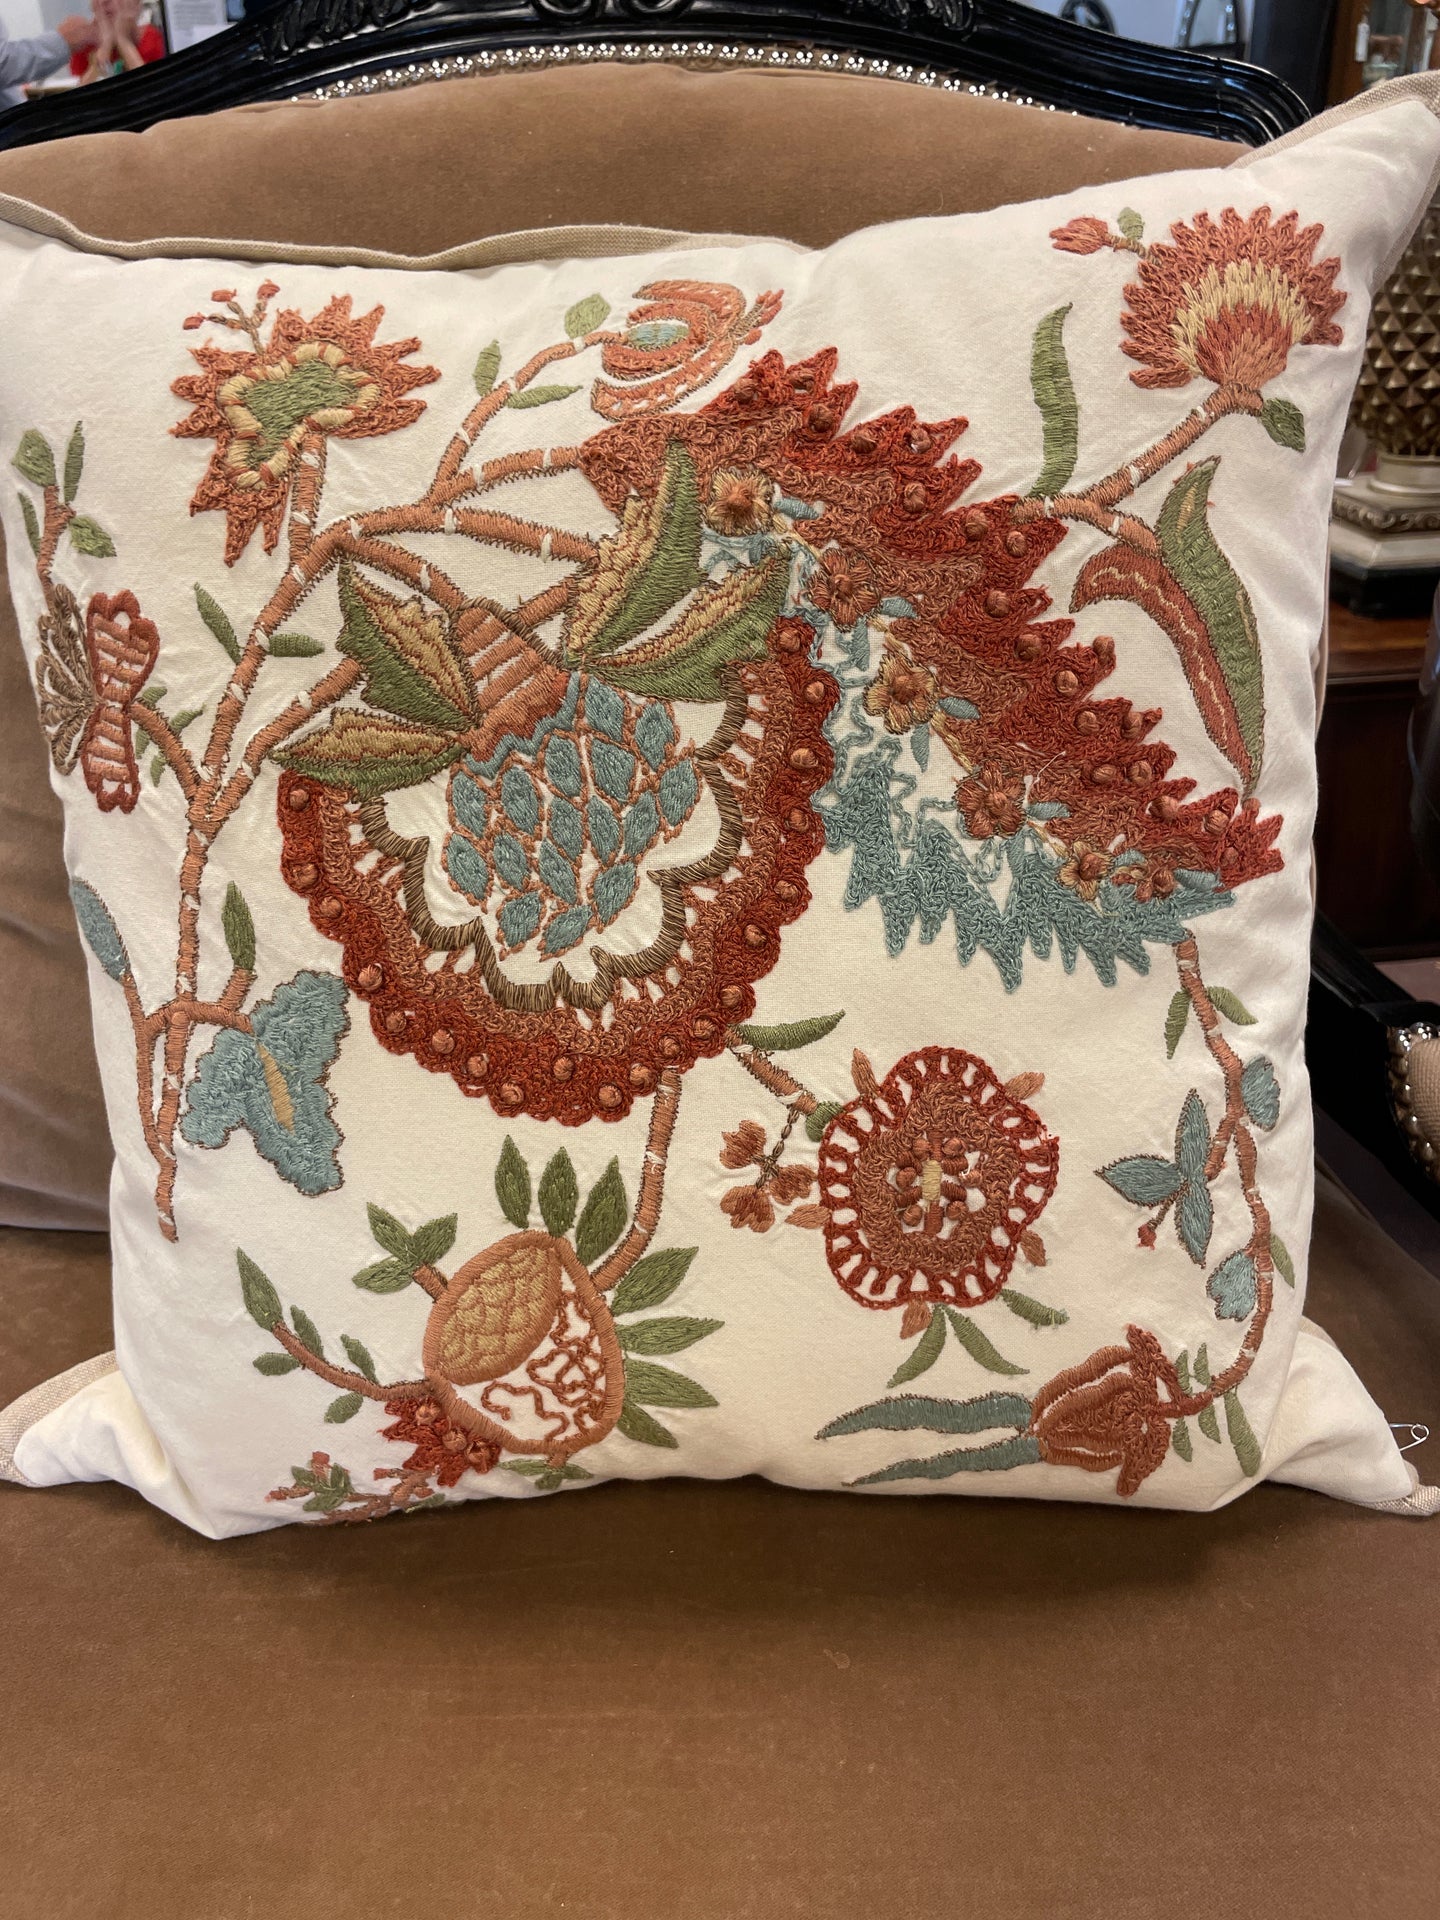 Floral Throw Pillow, Red, Teal & Green from Pottery Barn